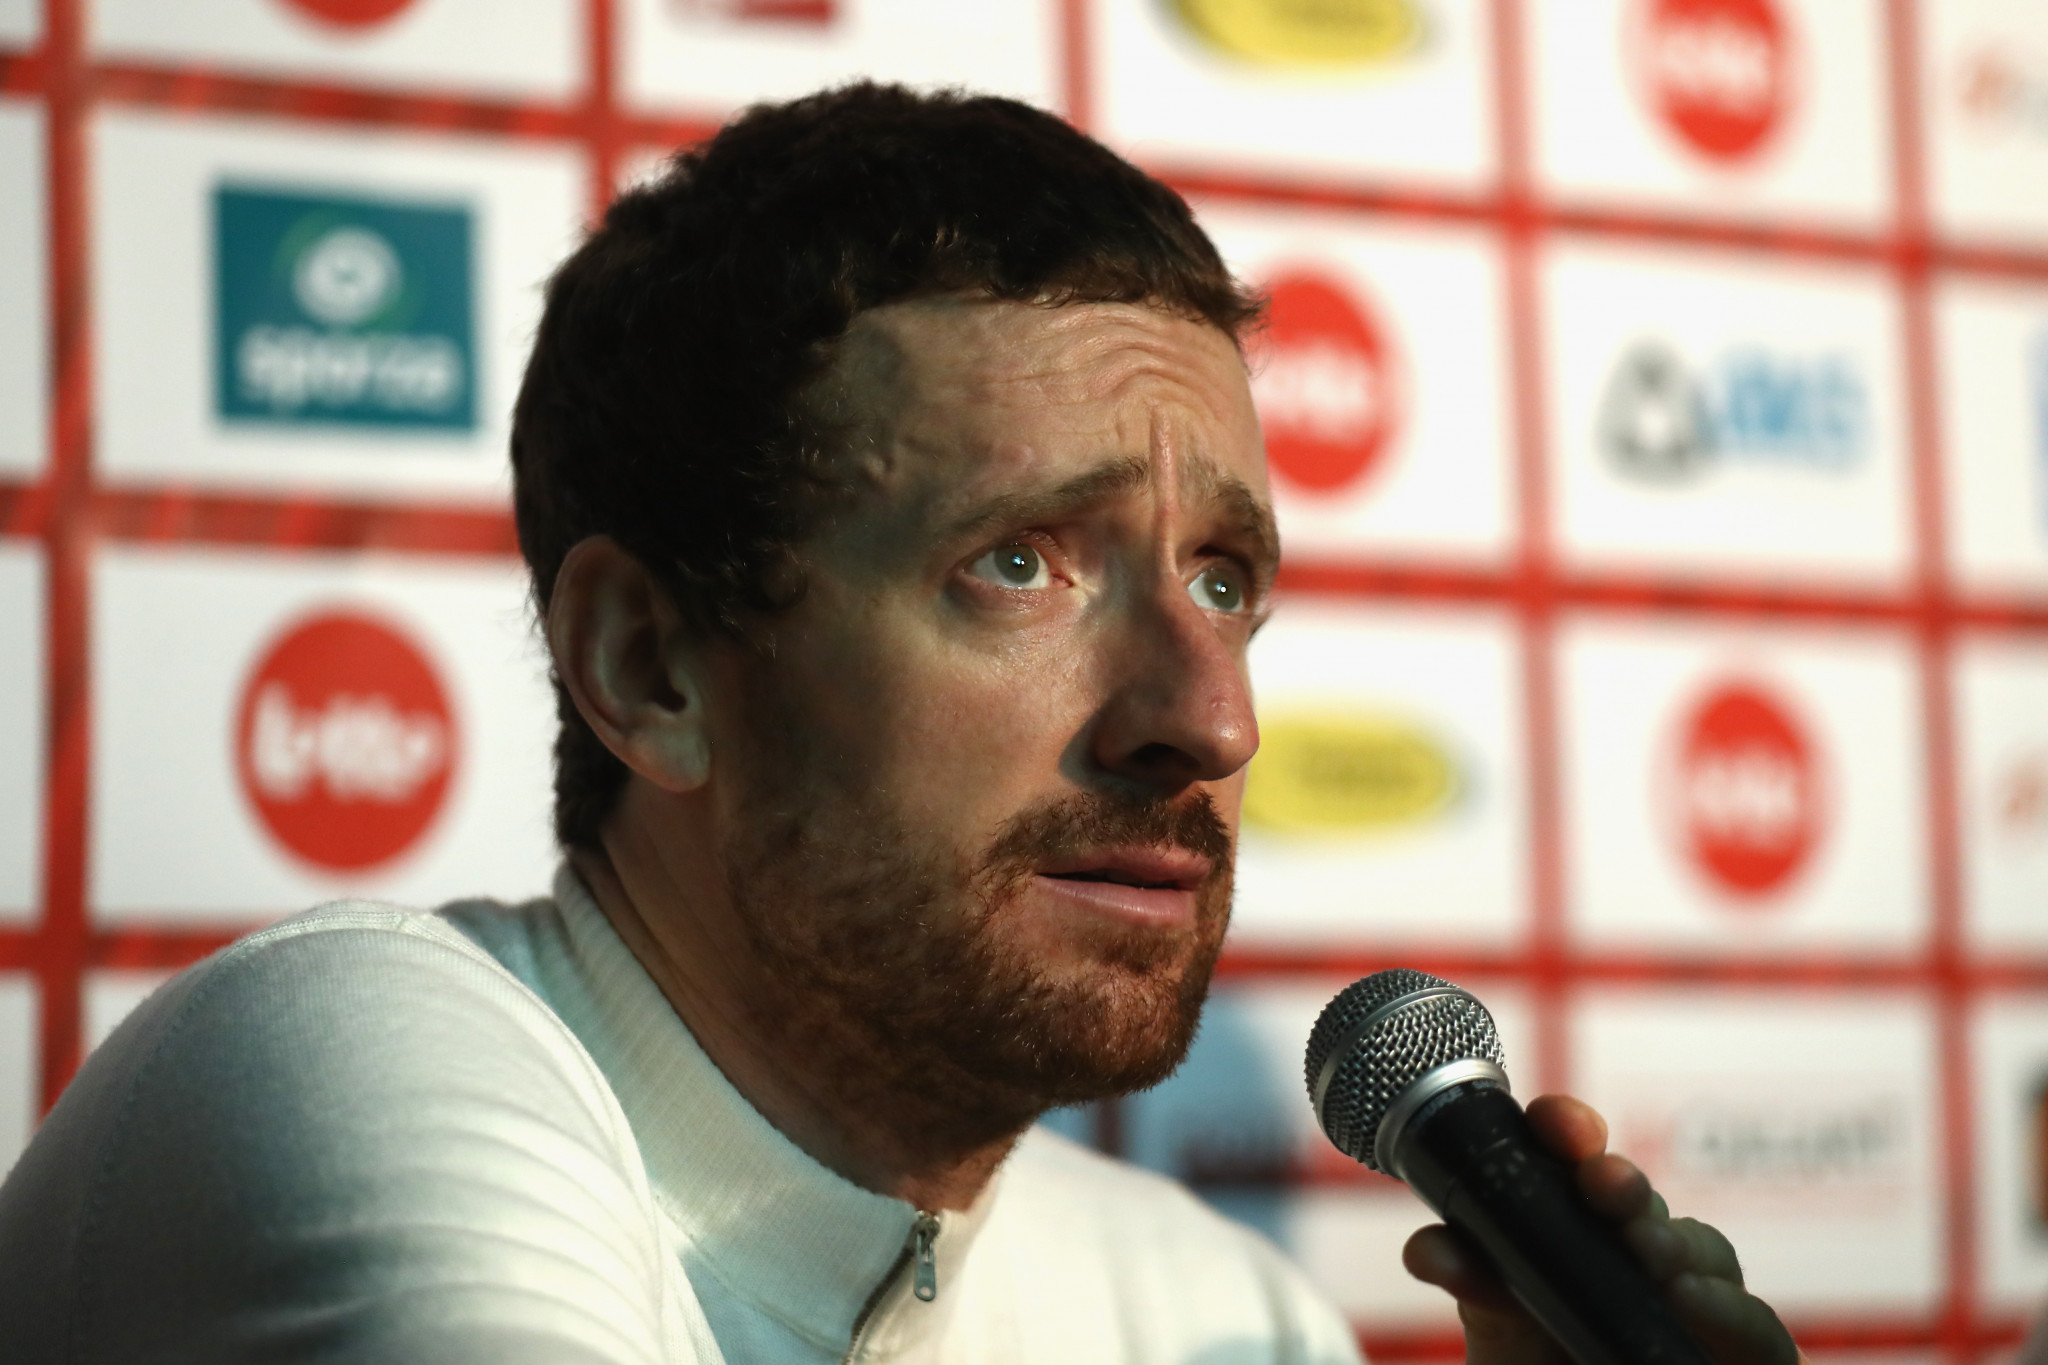 Richard Freeman administered the contents of a jiffy bag, which allegedly contained the corticosteroid triamcinolone, to Sir Bradley Wiggins in 2011 ©Getty Images